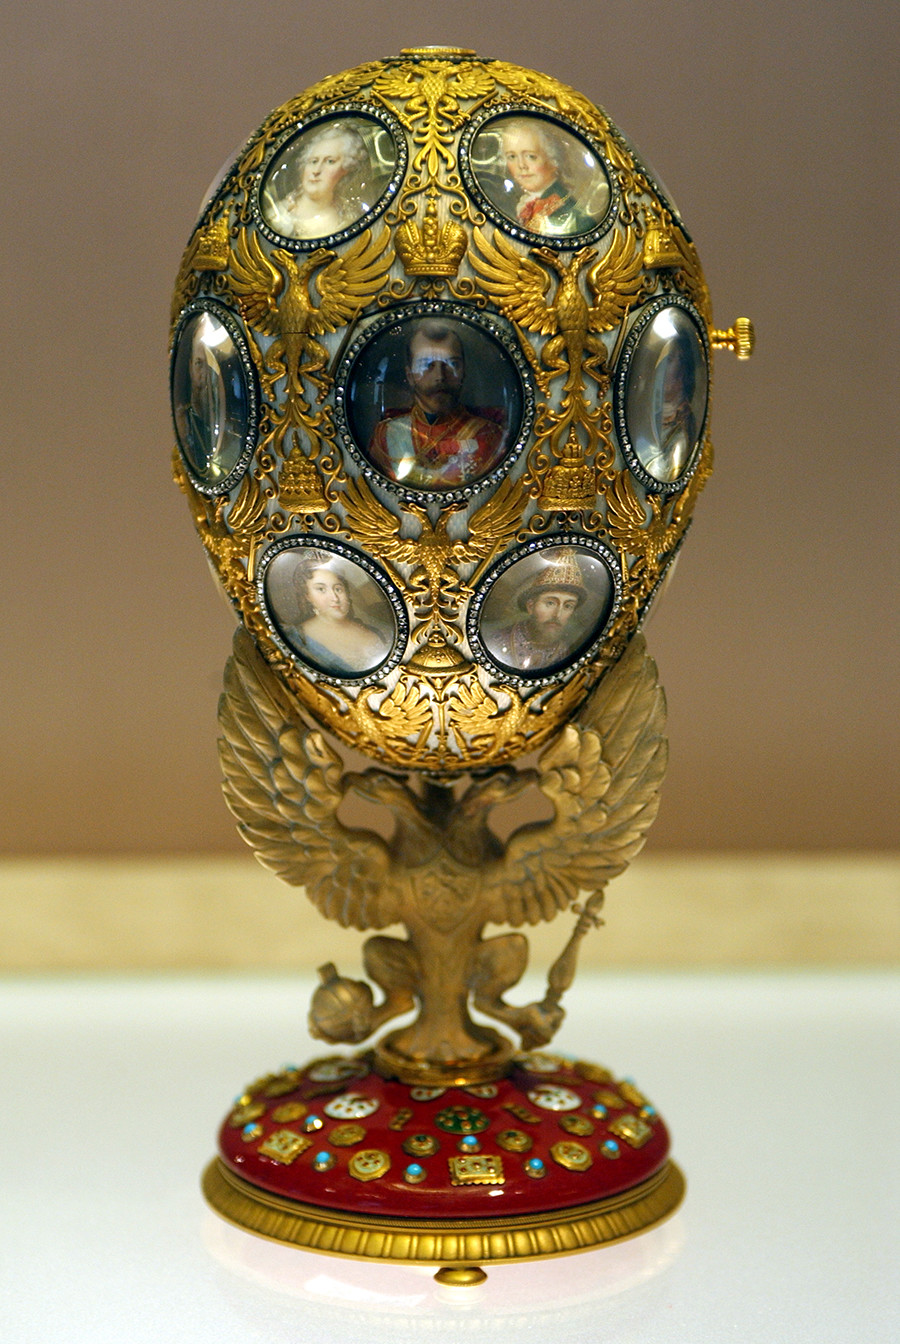 Faberge is renowned for the fabulous jeweled Easter eggs he created for the Russian royal family